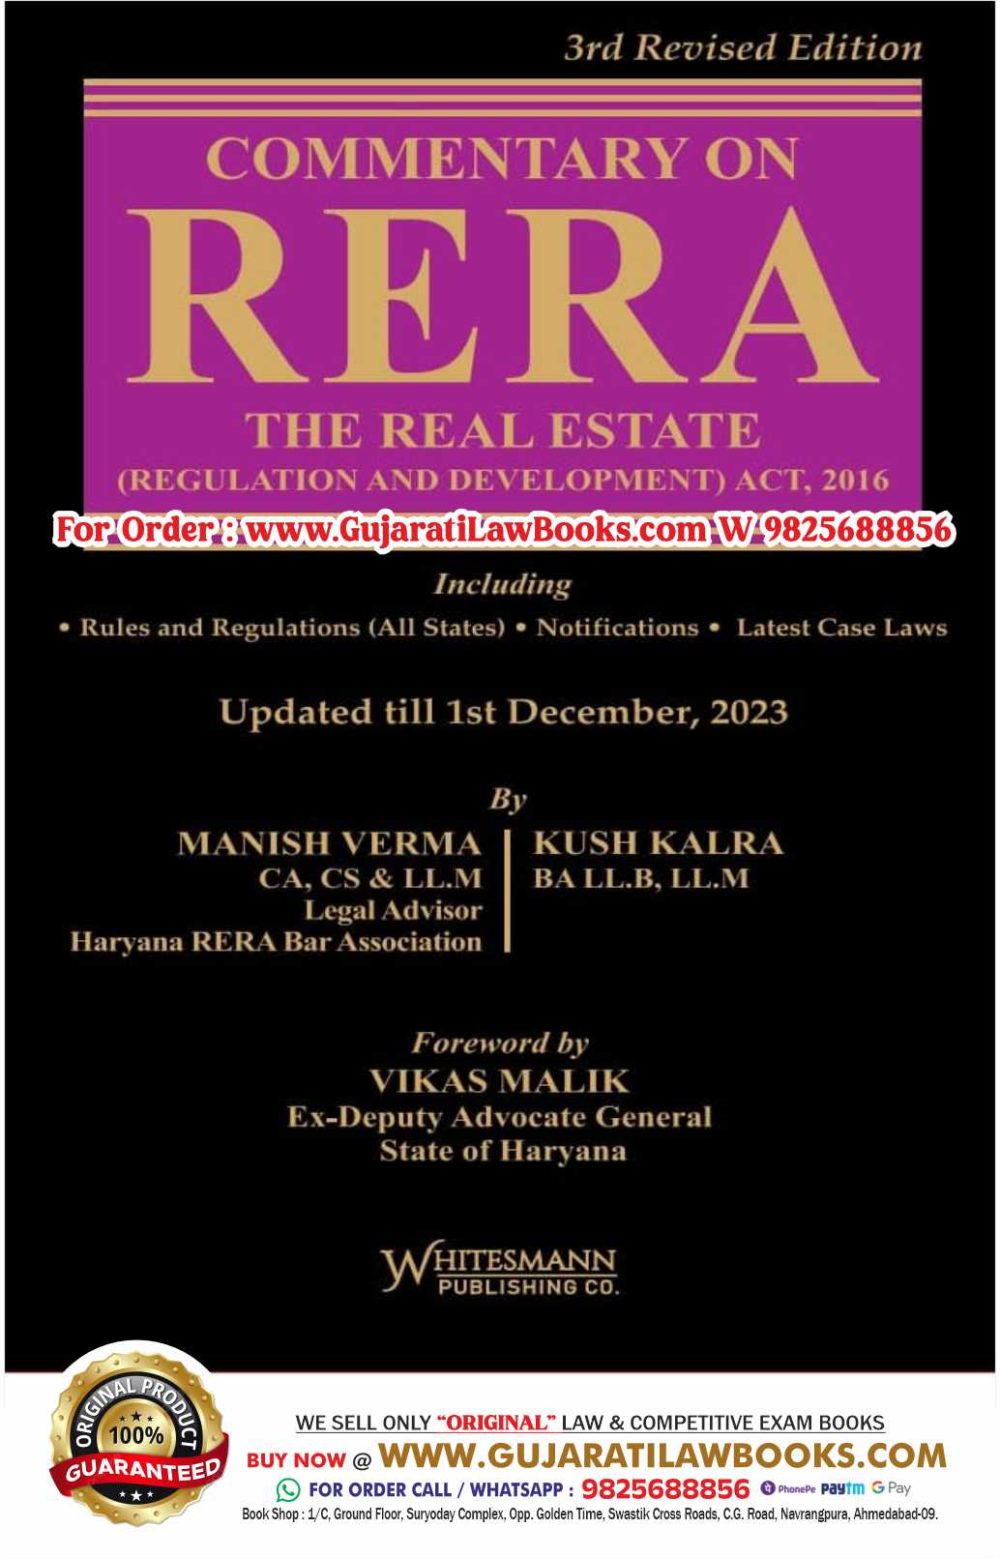 Commentary on RERA - Real Estate Regulation and Development Act, 2016 - Latest 3rd Revised Edition March 2024 Whitesmann